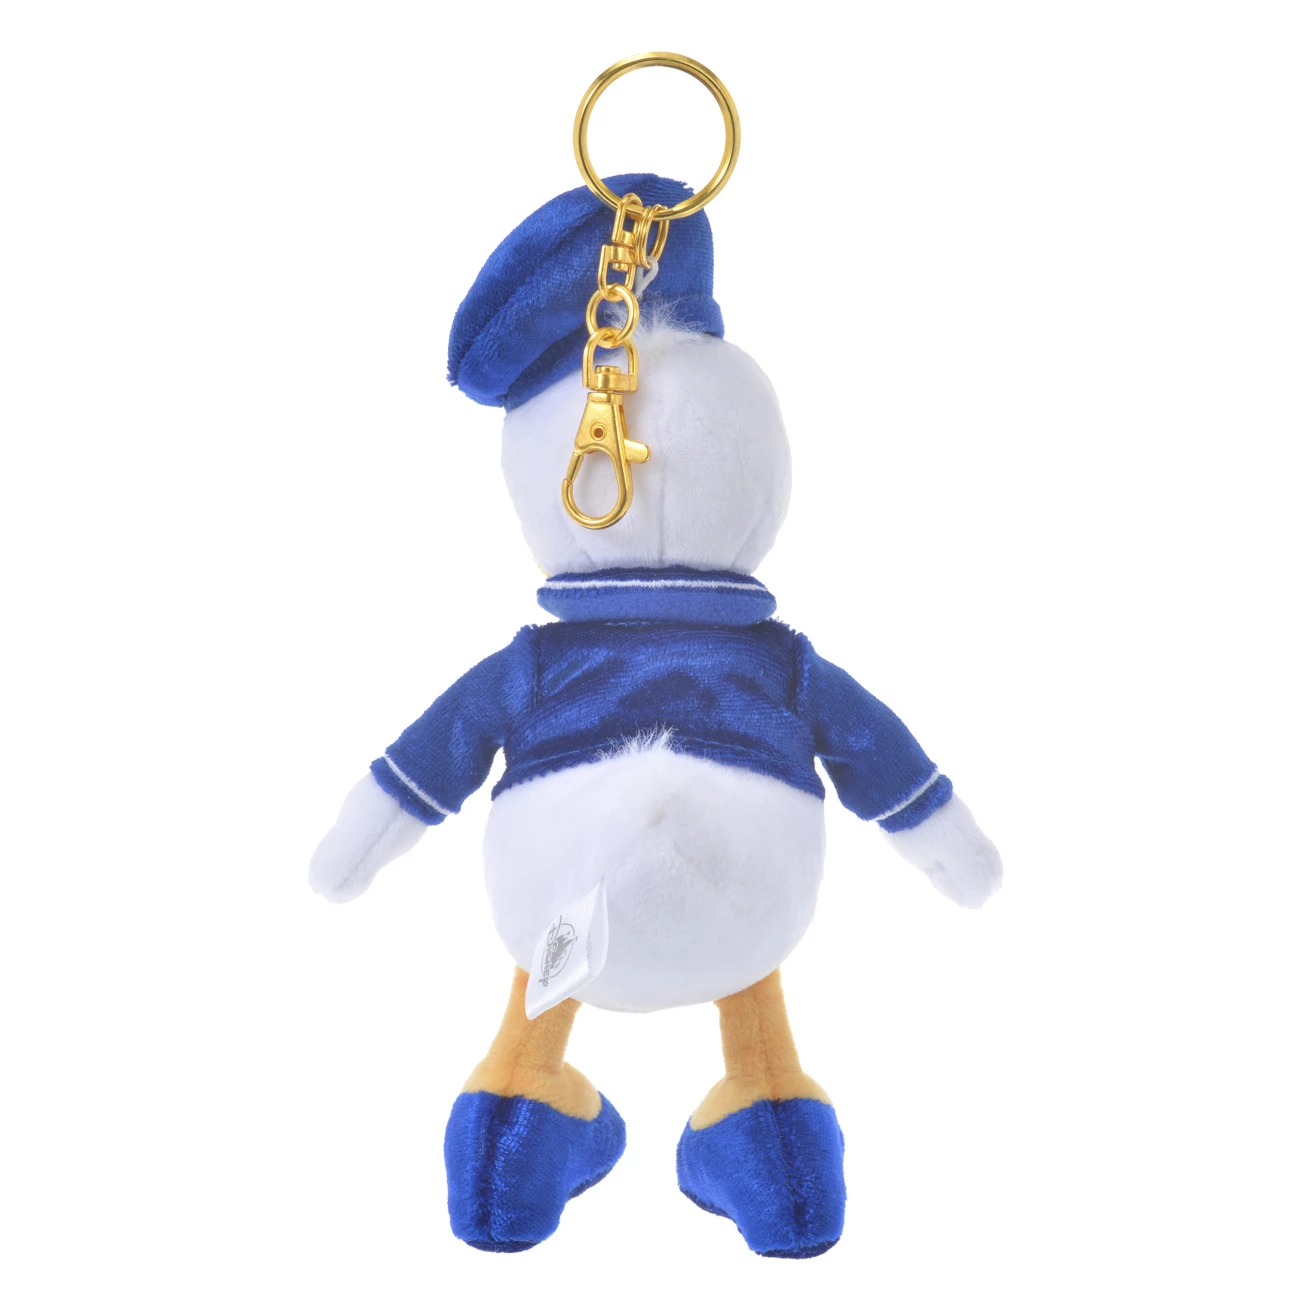 SDJ - DONALD DUCK IT'S MY STYLE Collection - Keychain